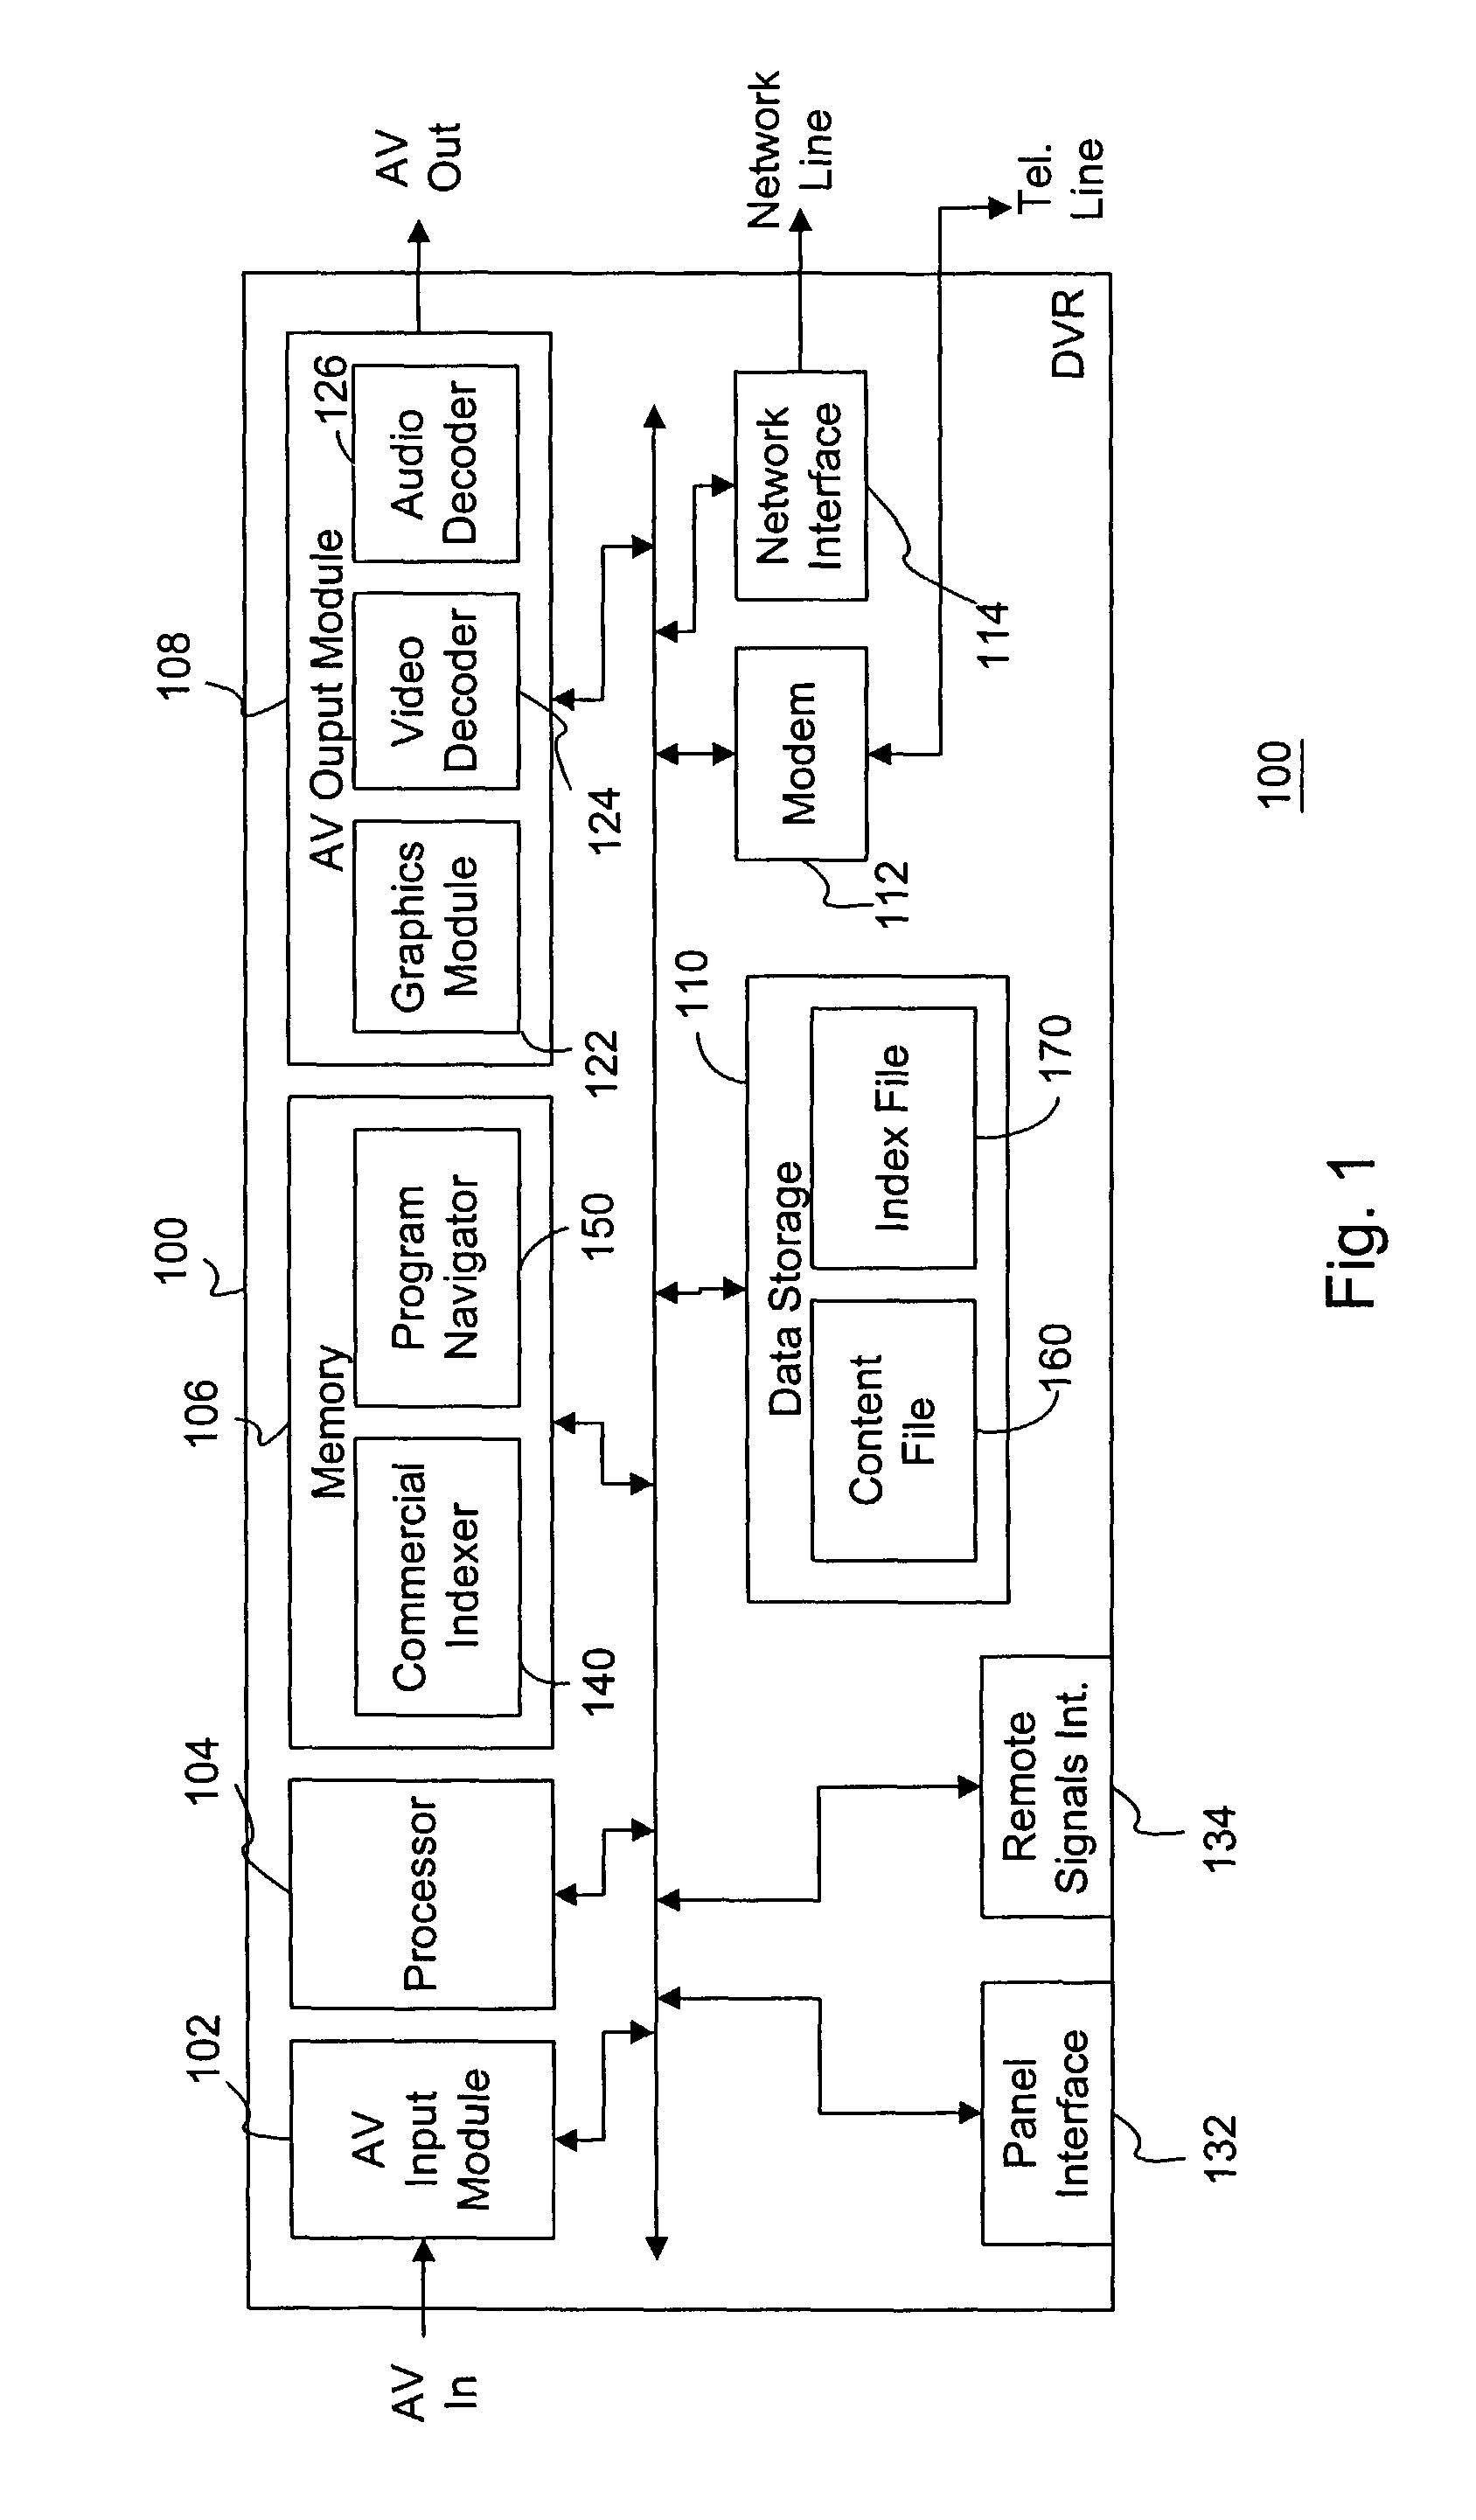 System and method for indexing commercials in a video presentation